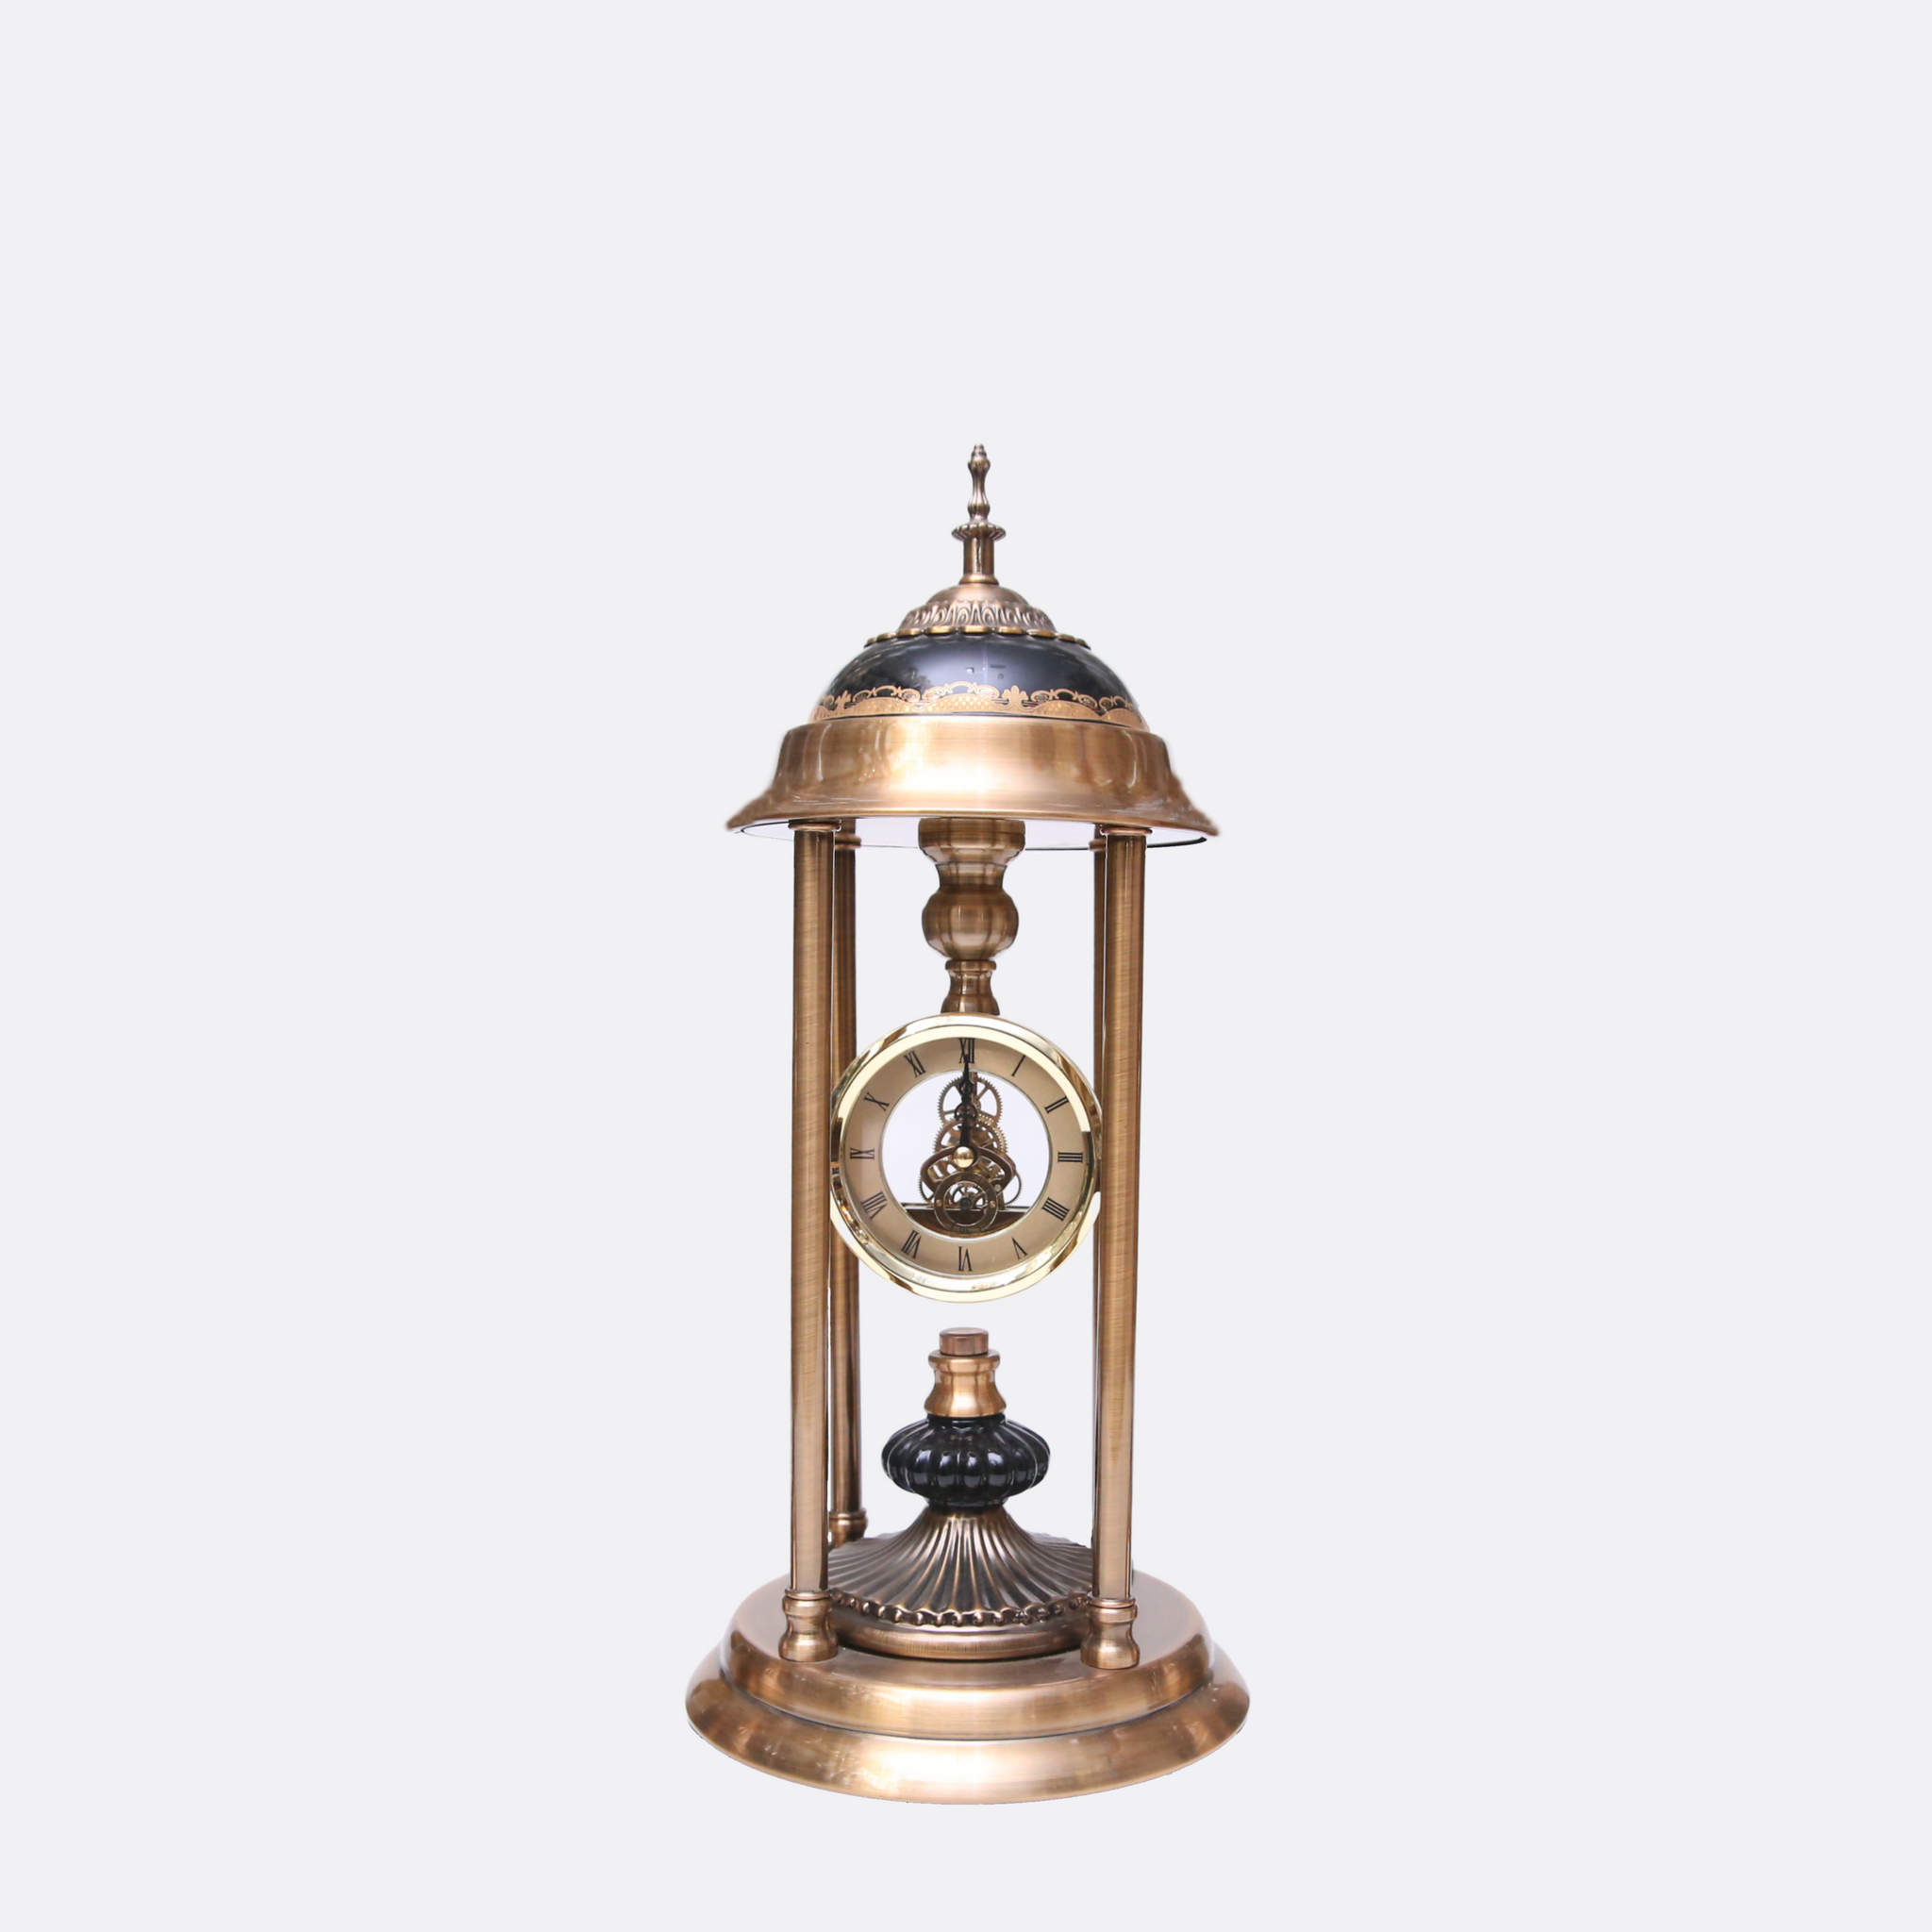 Royal Timepiece With Candle Holders